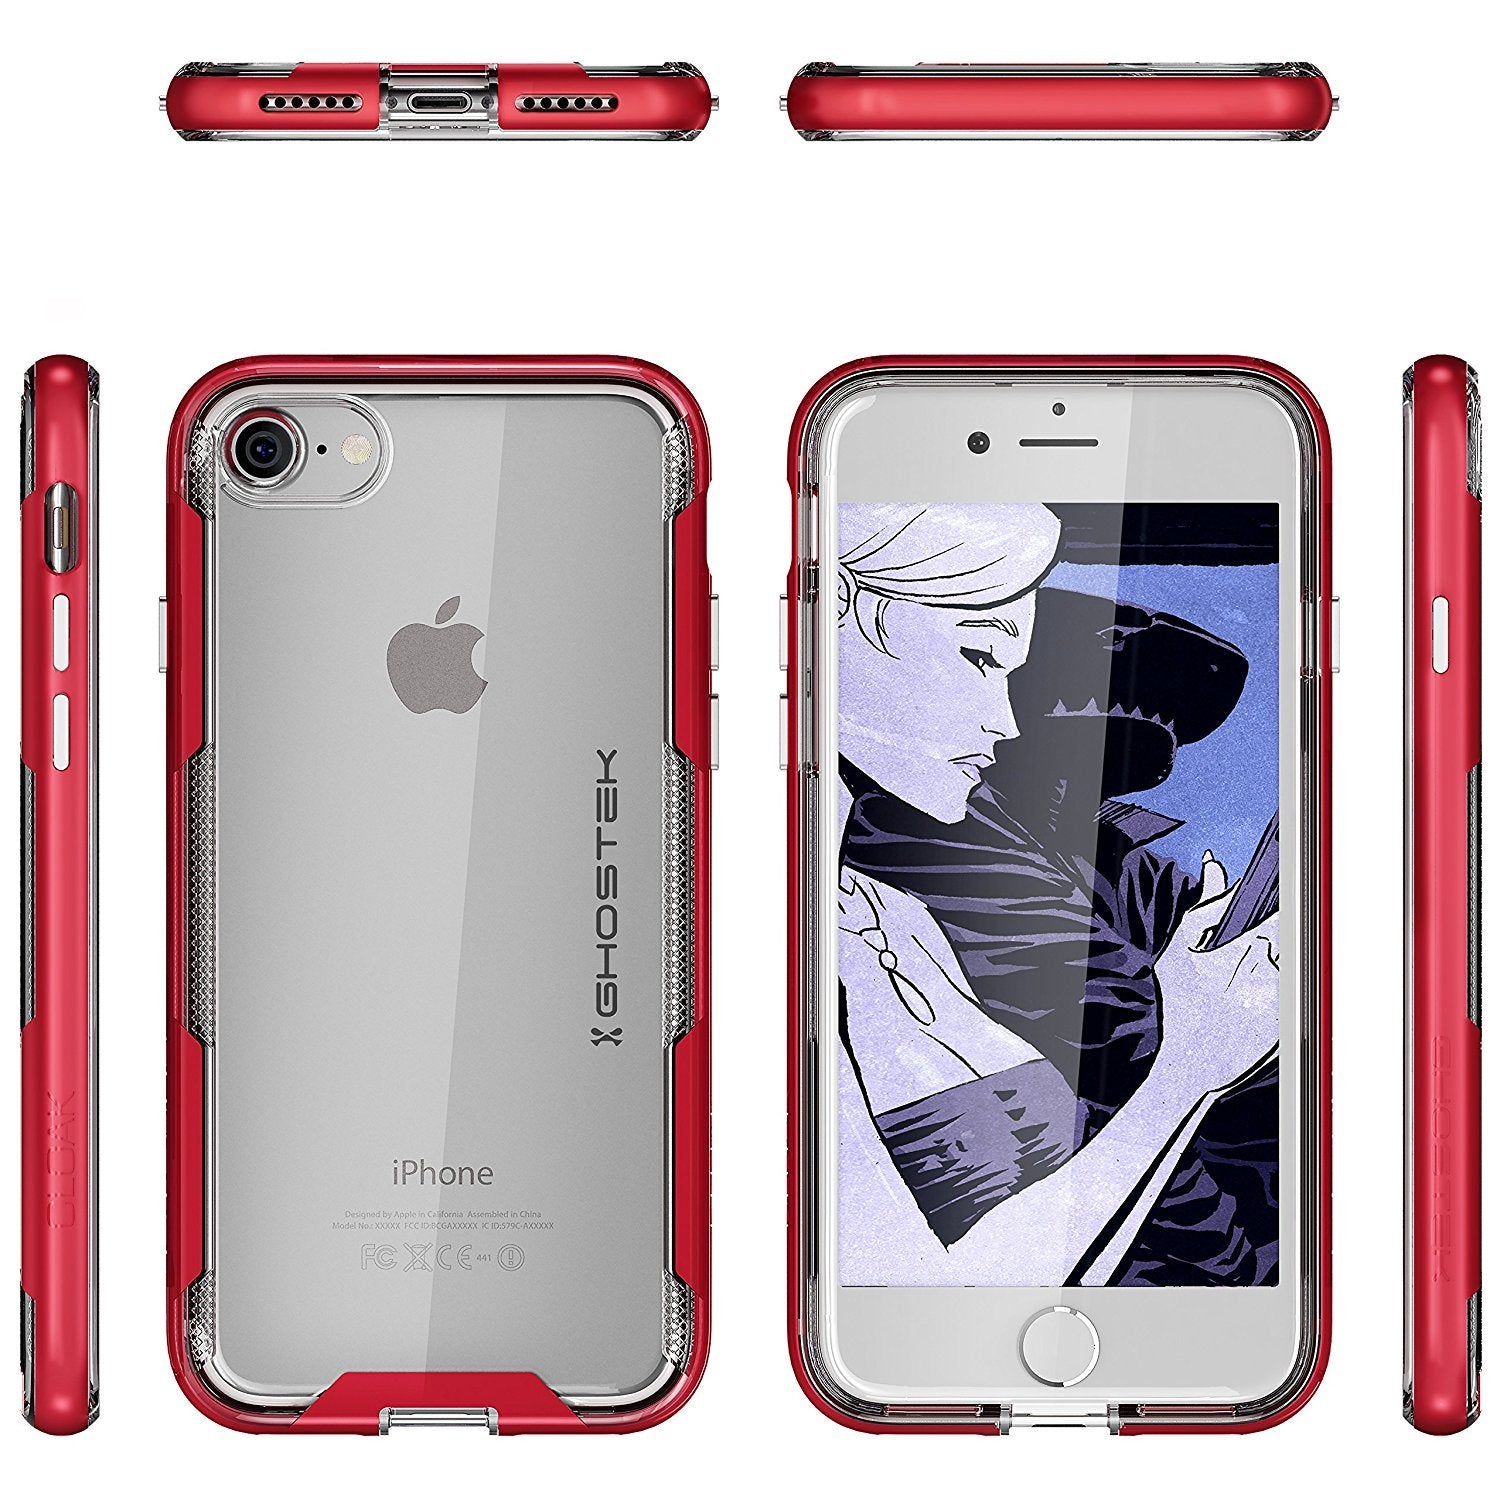 iPhone 7 Case, Ghostek Cloak 3 Series Case for iPhone 7 Case Clear Protective Case [RED] - PunkCase NZ